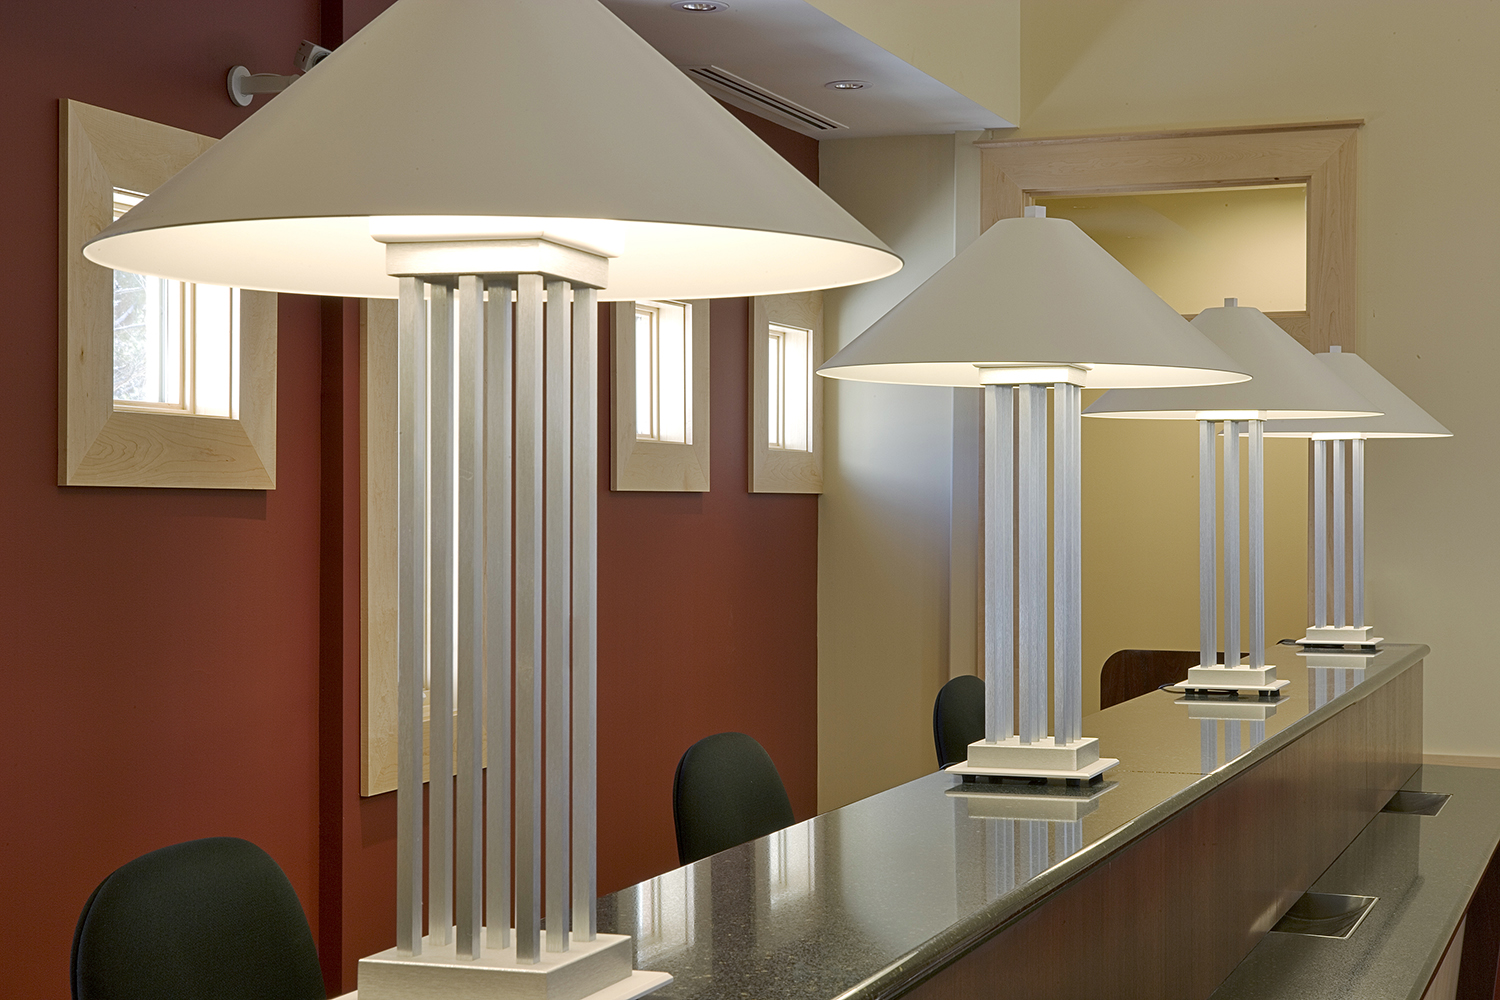 South Bay portable lamps provide distinguished architectural lighting on a reception counter.